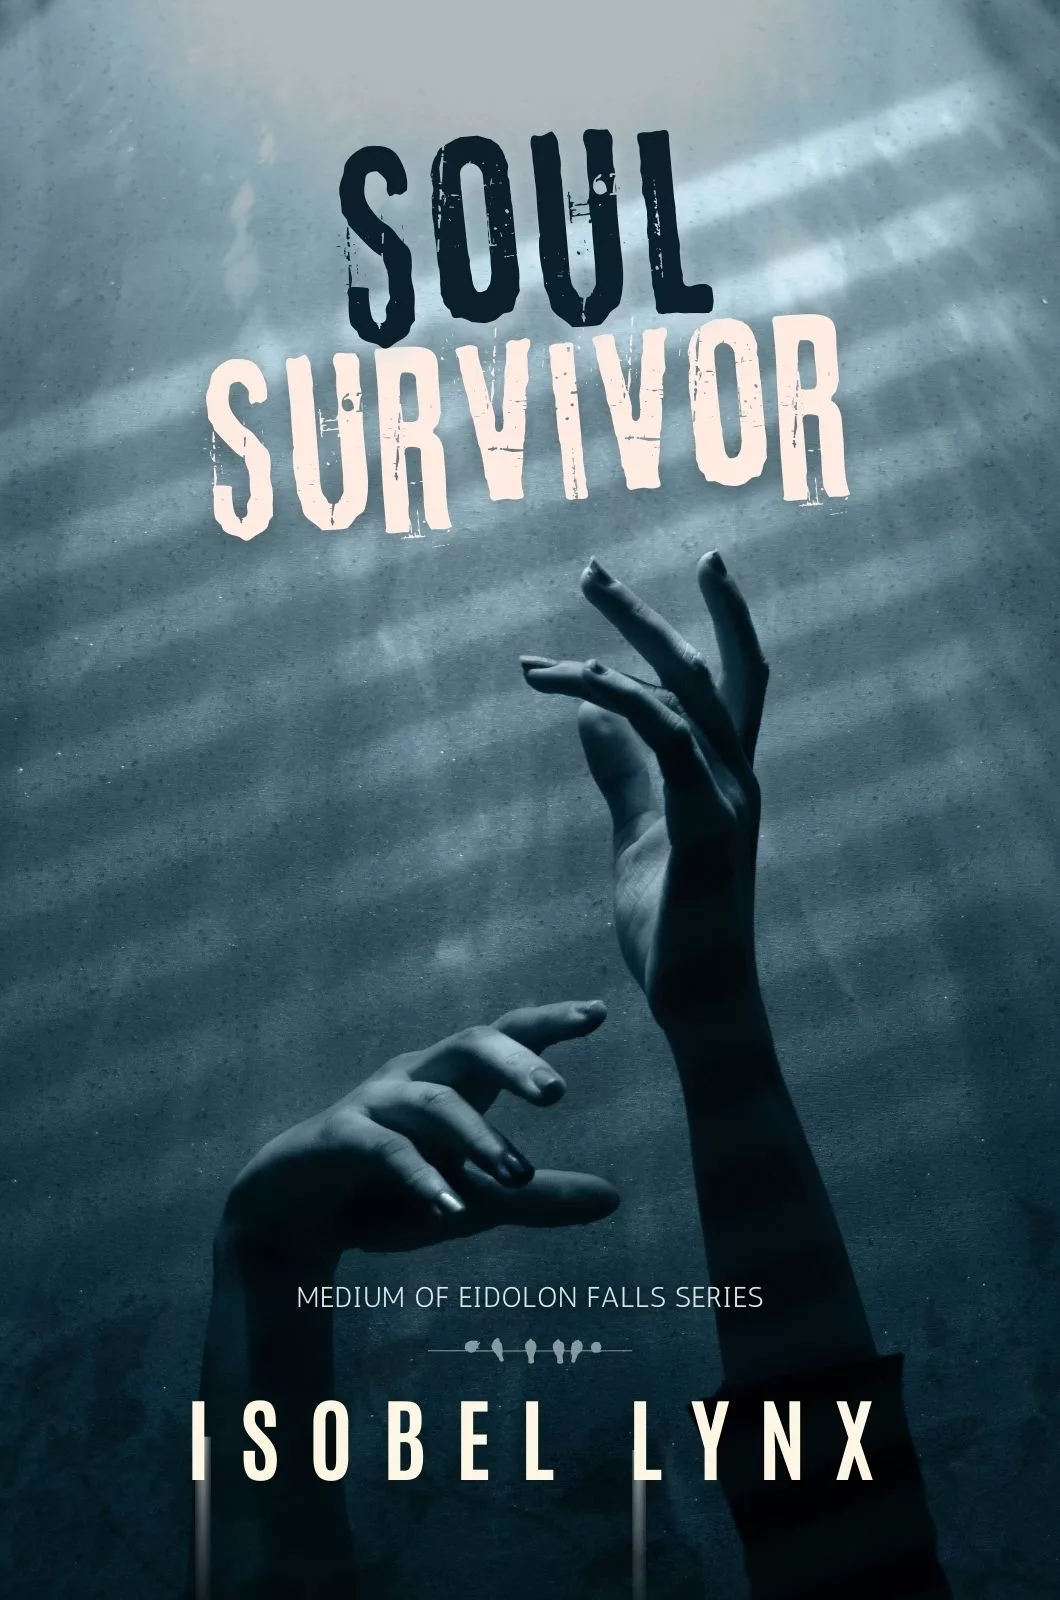 Book cover of Soul Survivor by Isobel Lynx, featuring a pair of hands reaching out, creepy atmosphere